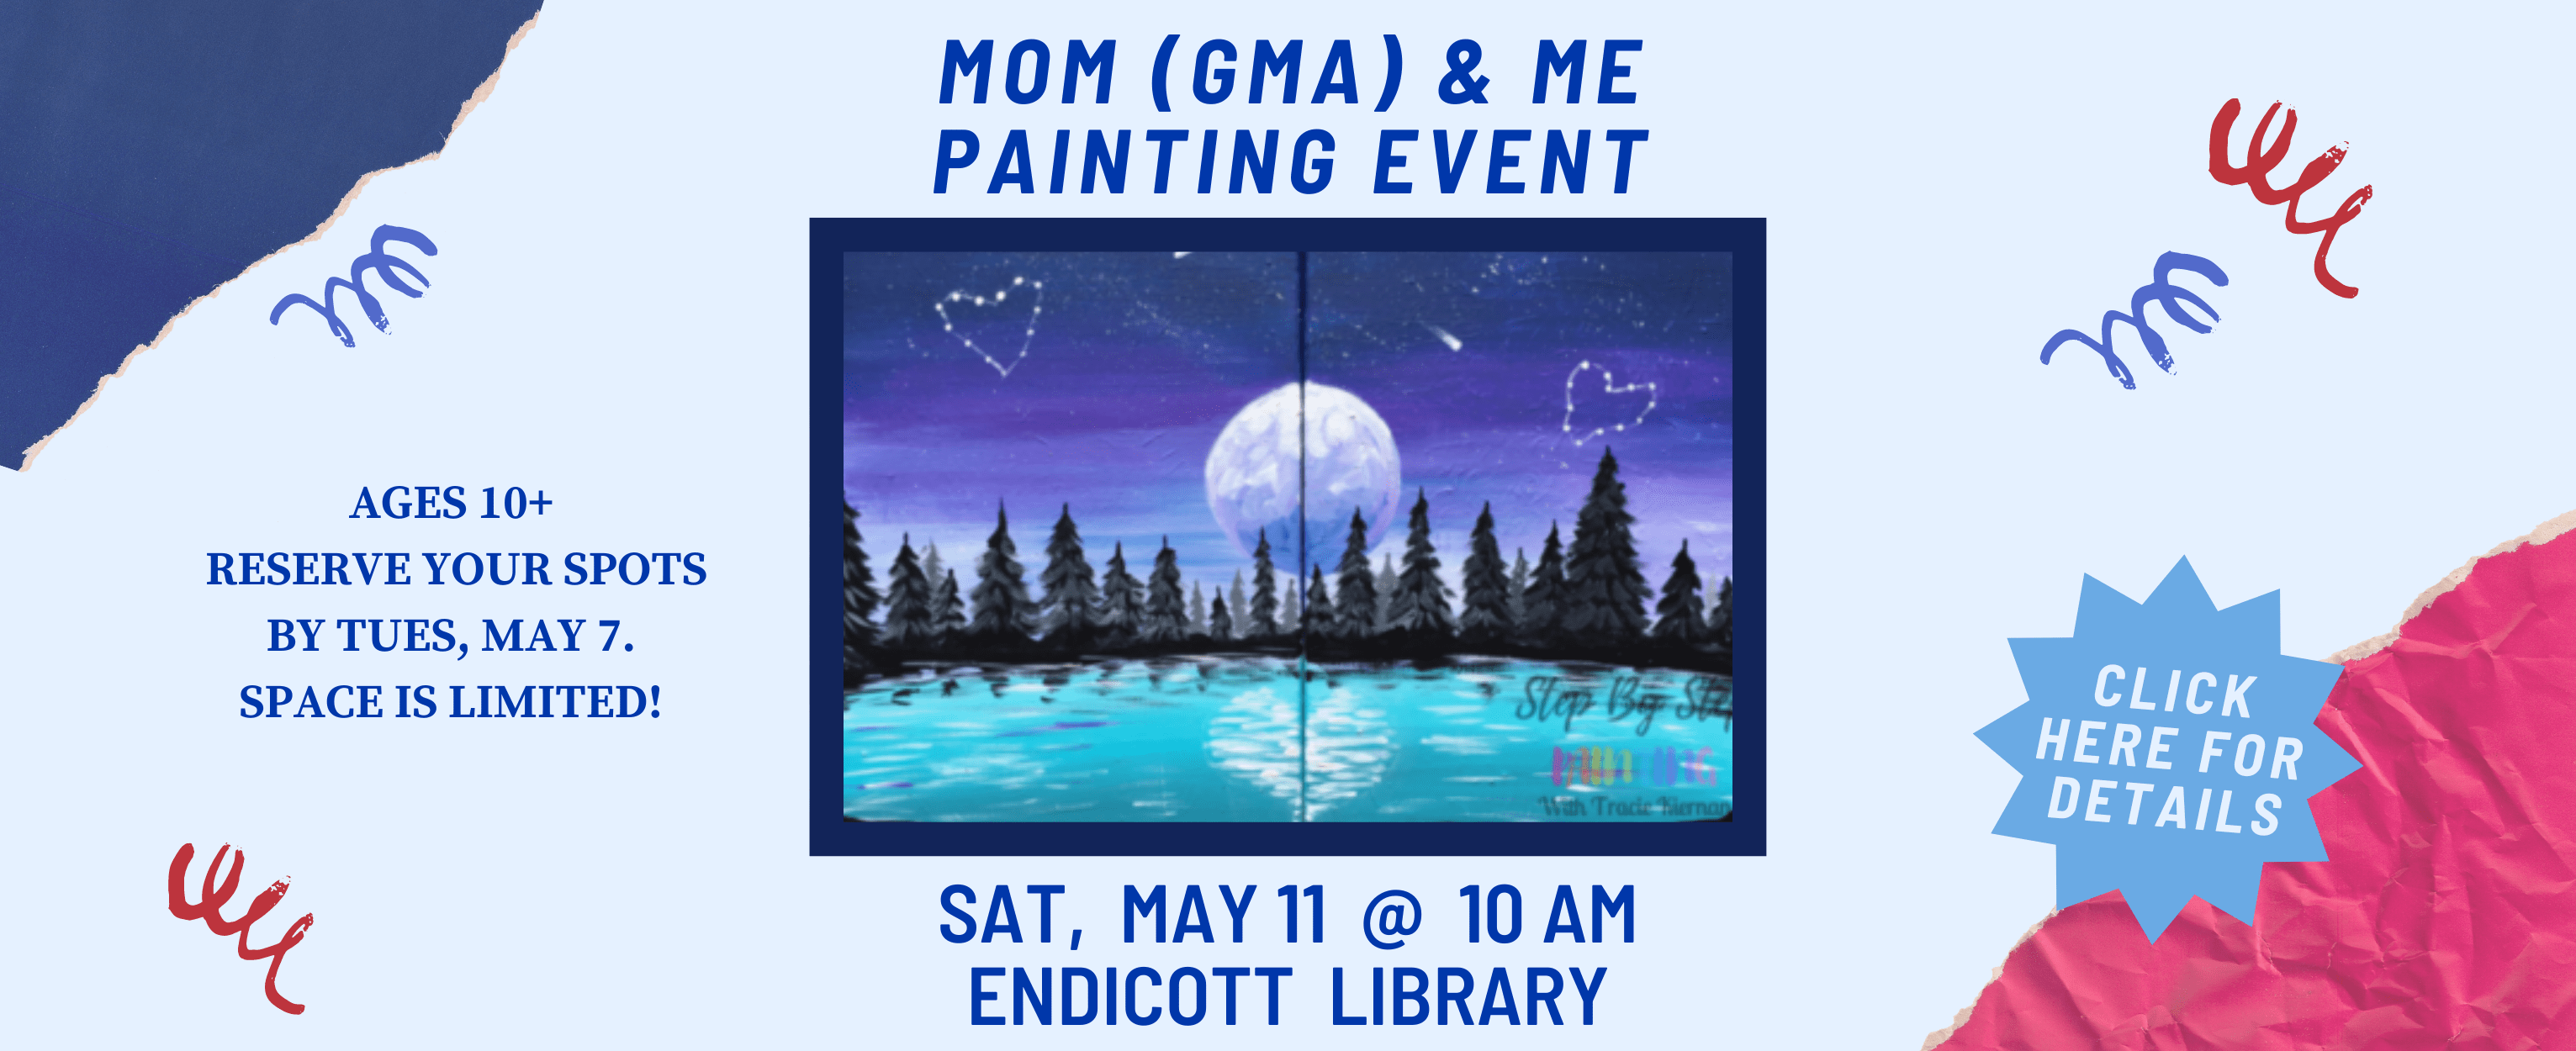 Our Endicott Library is hosting a Mother's (and Grandmother's!) Day Painting Event on Saturday, May 11 at 10 AM. Register your spot today and click here for more information. 